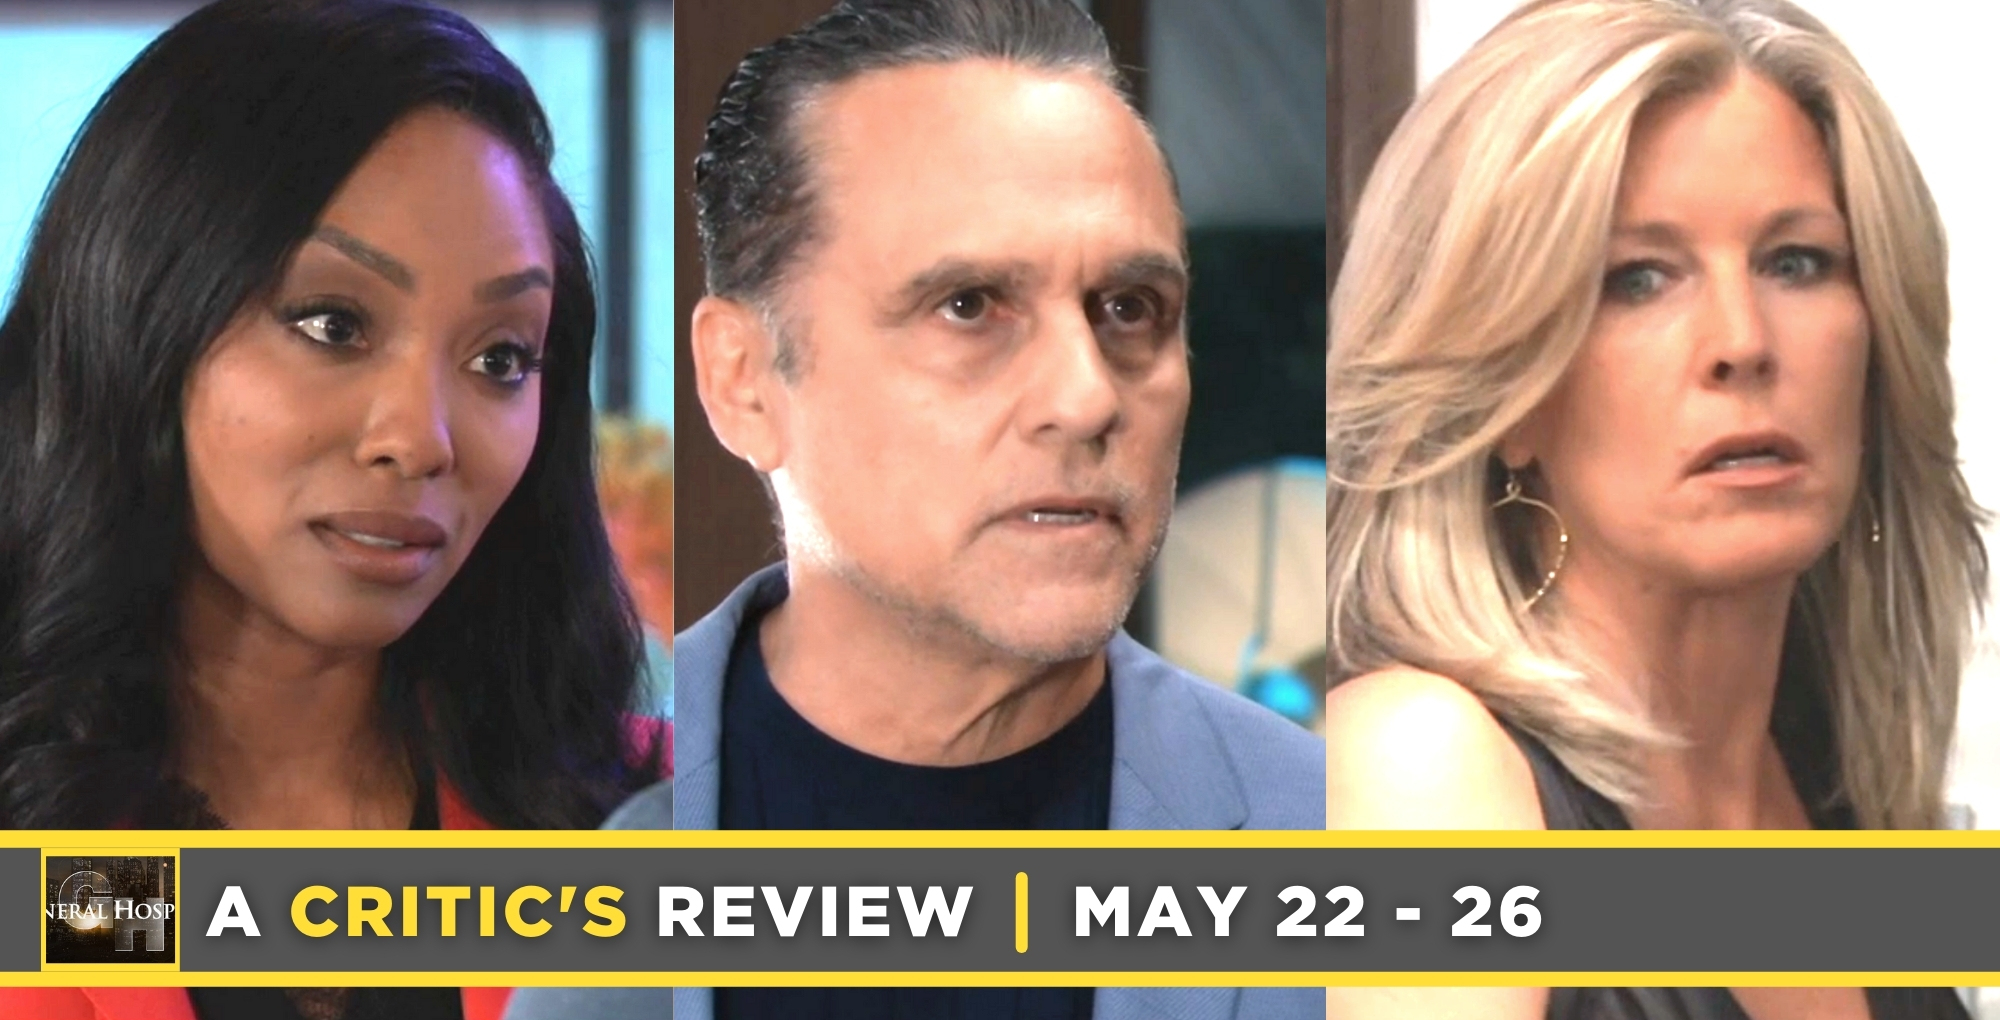 general hospital critic's review for may 22 – may 26, 2023, three images jordan, sonny, and carly.